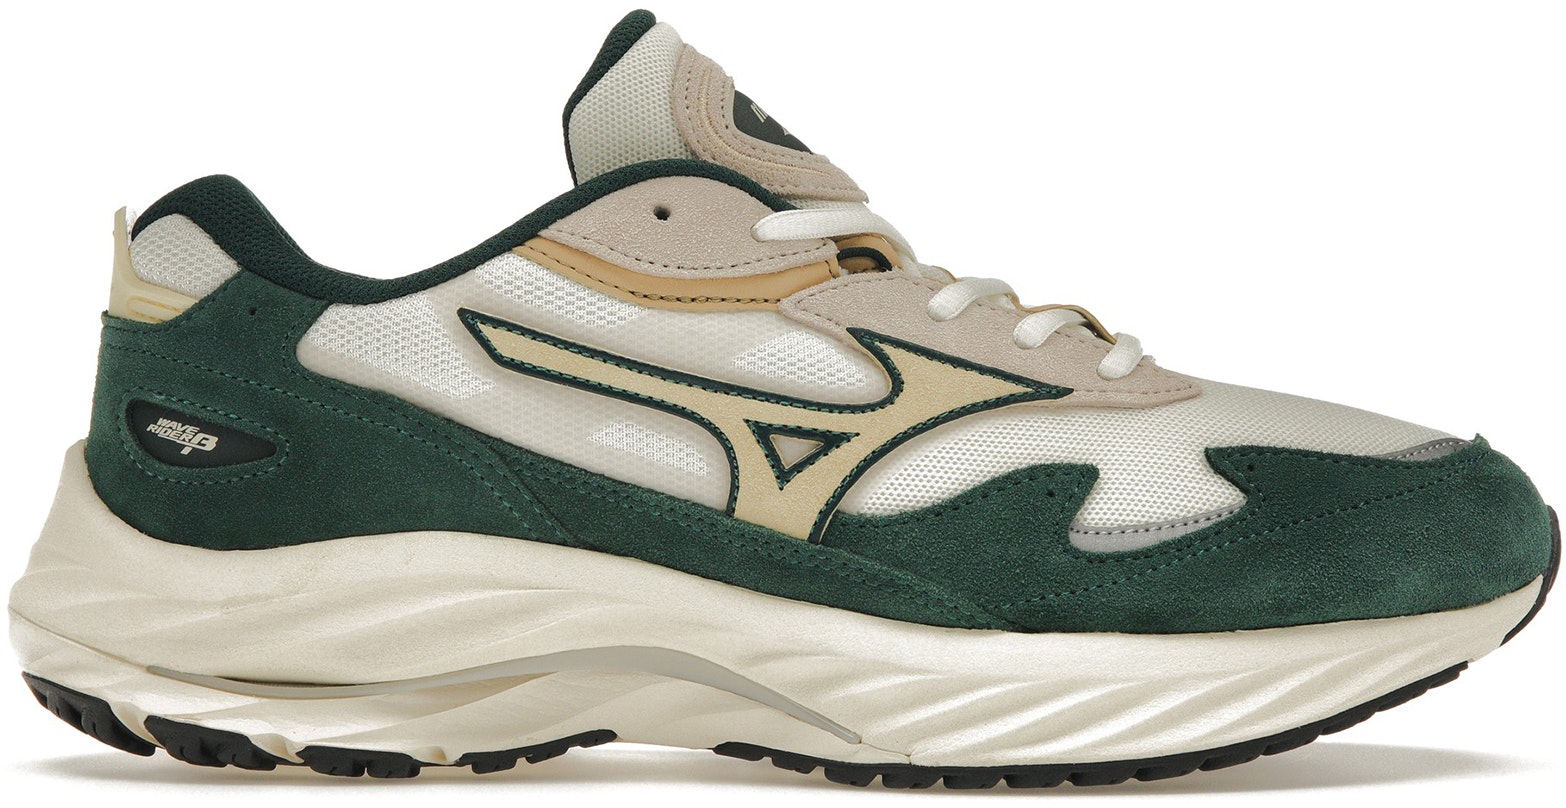 Mizuno Presents A New Pack Of Its Wave Rider Beta